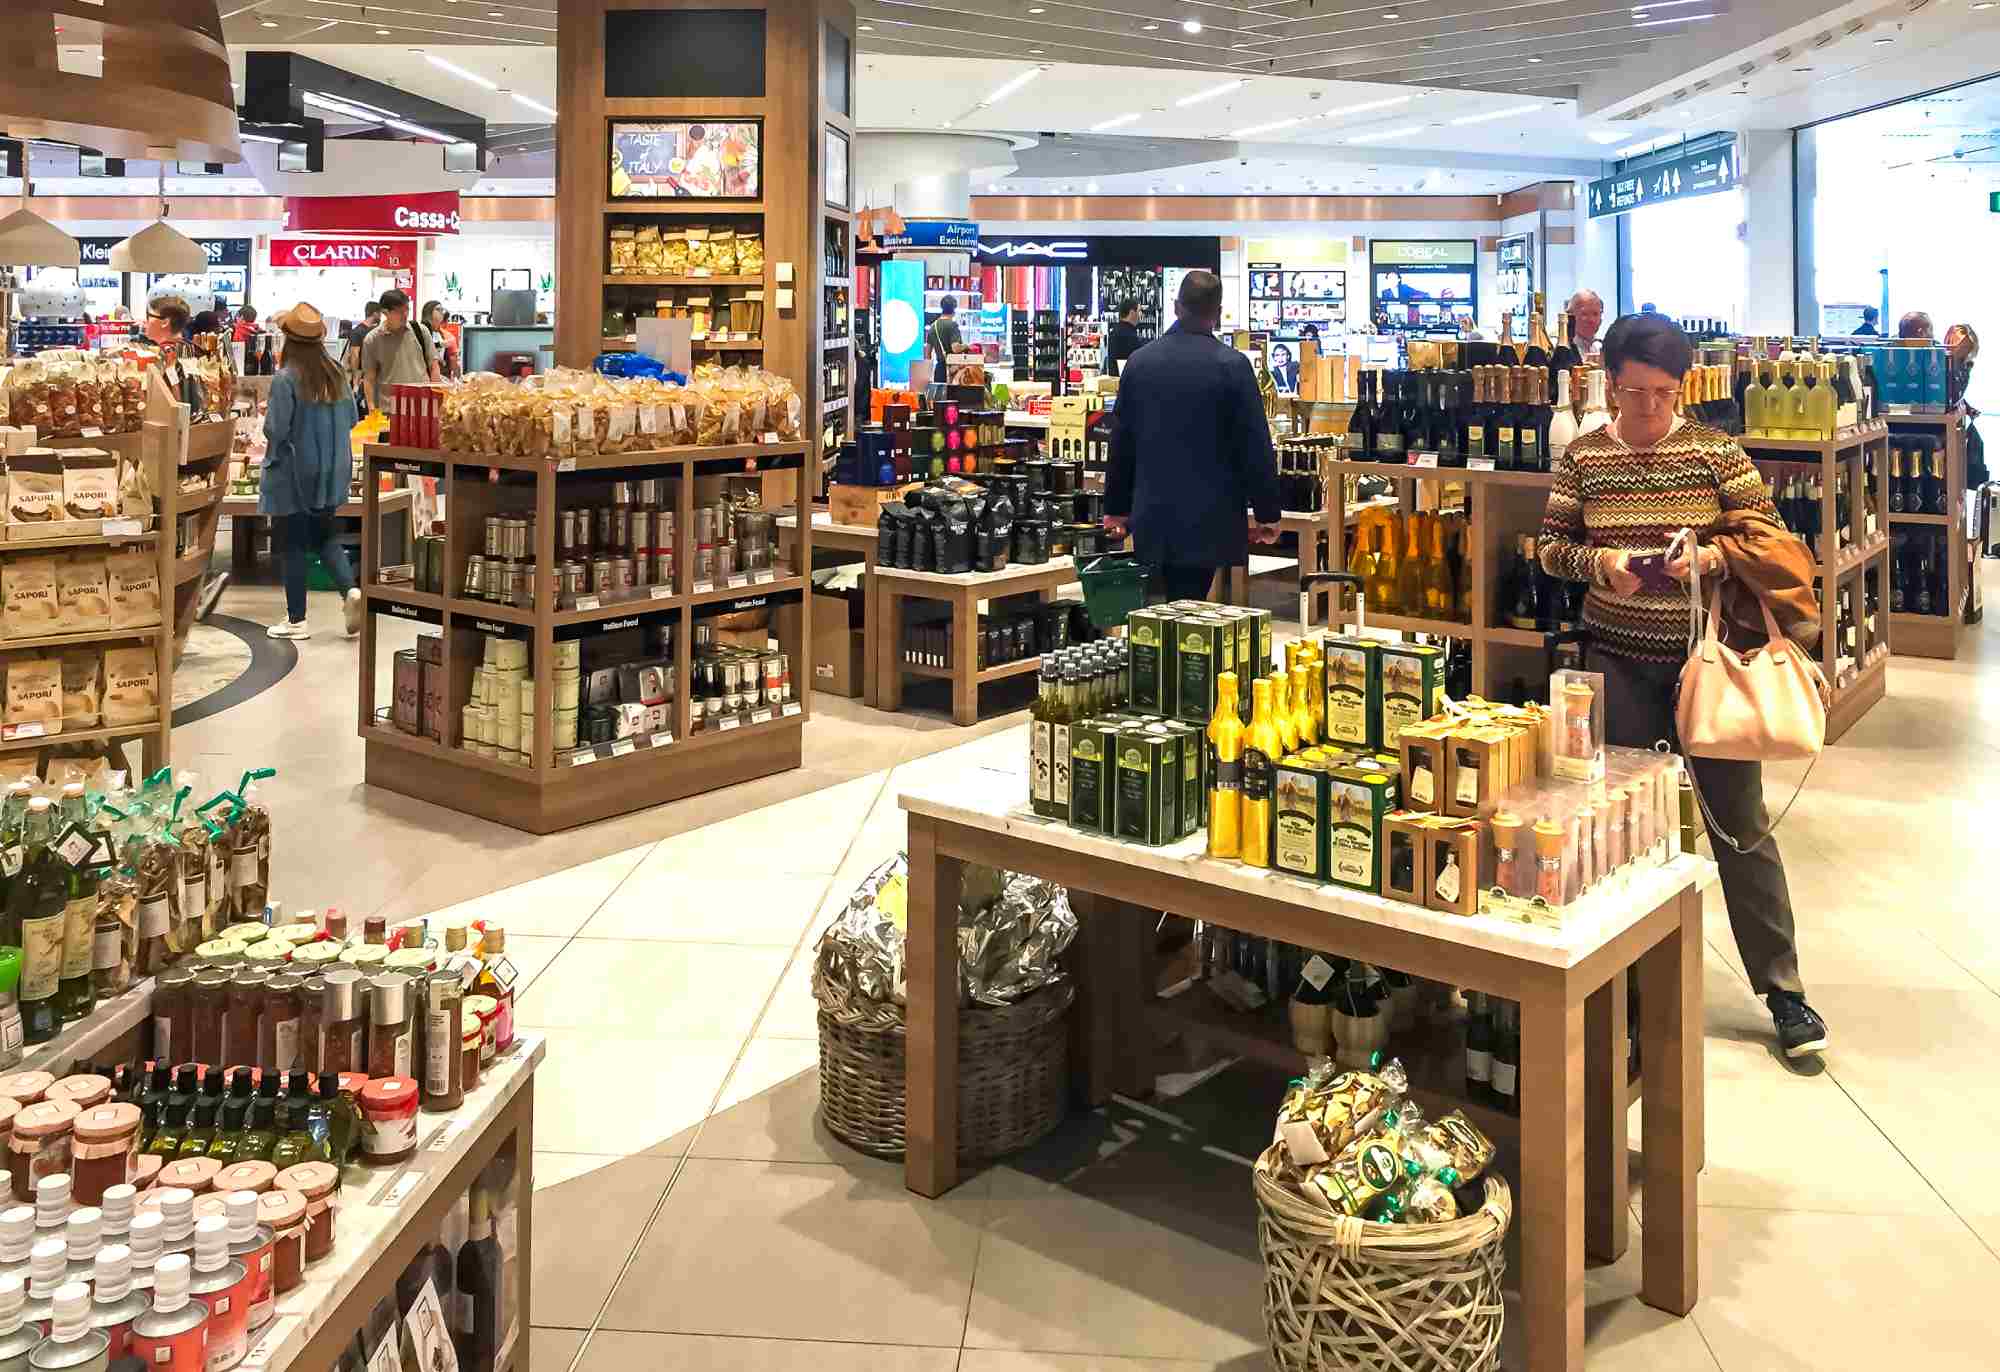 Italian products, such as olive oil, at the duty free section of an airport